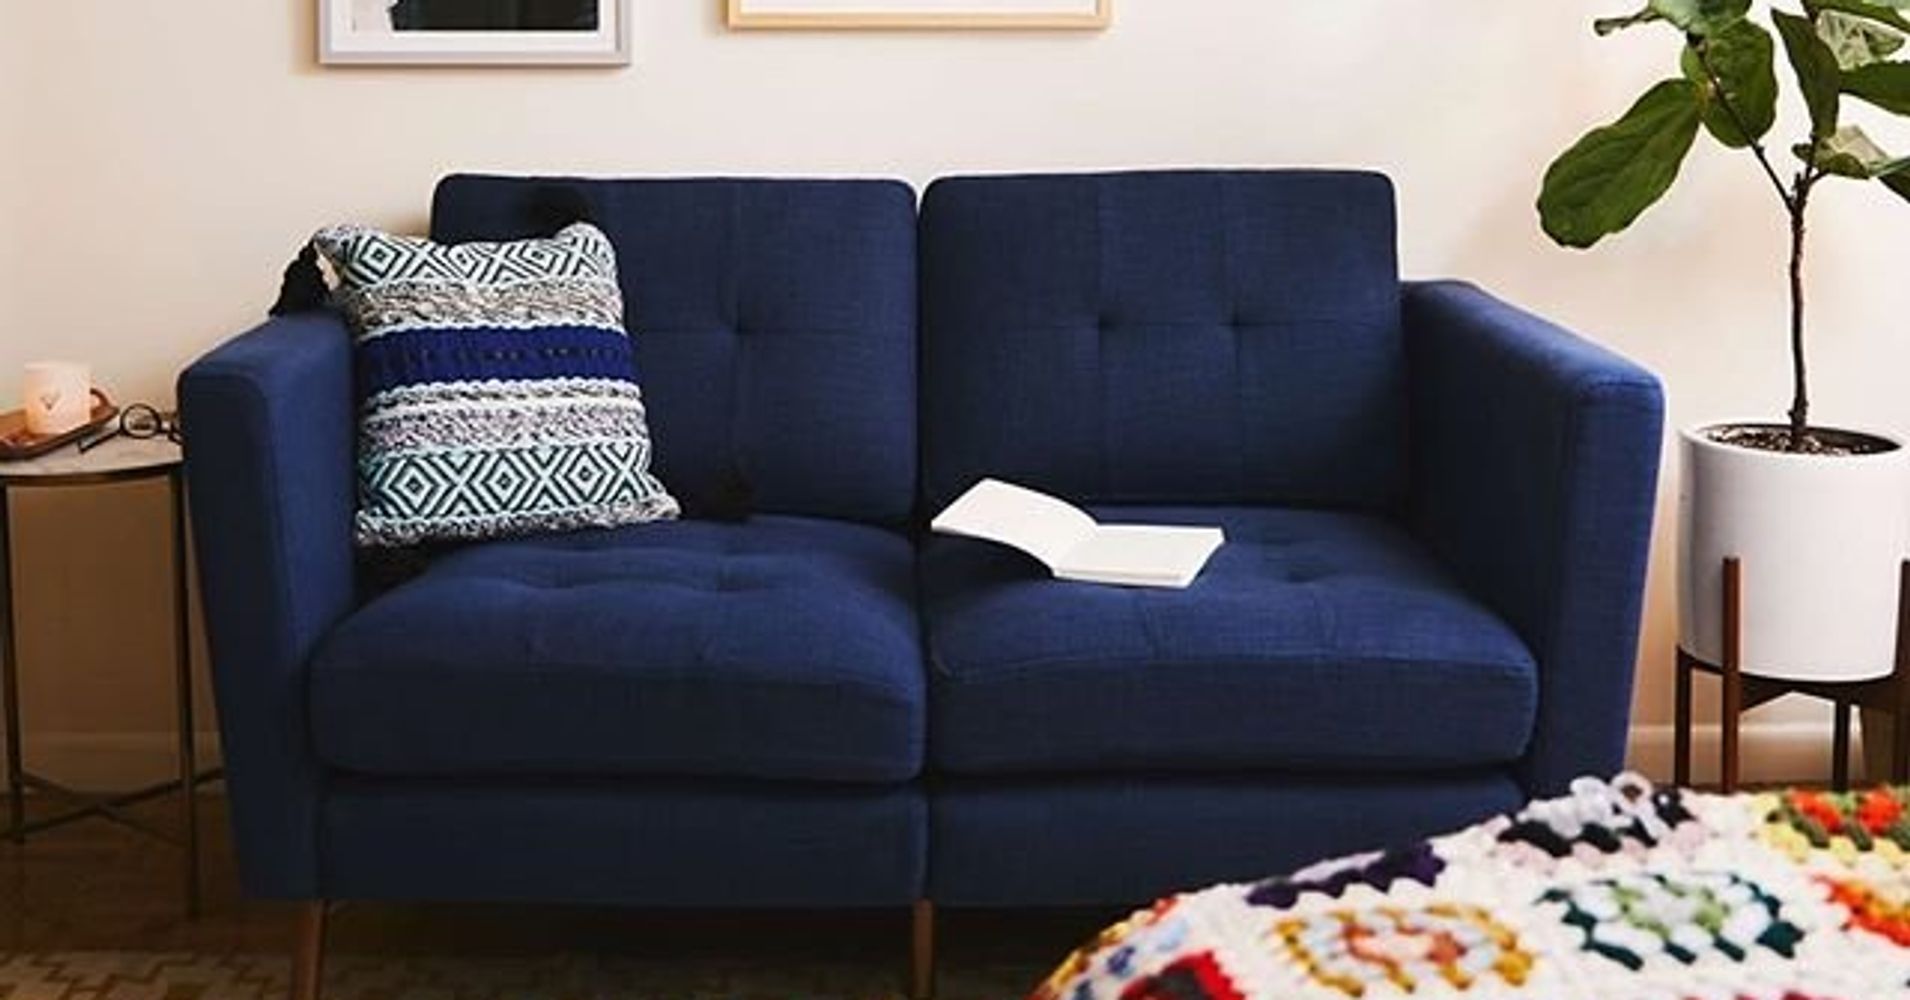 15 Of The Best Furniture Stores For Small Spaces | HuffPost